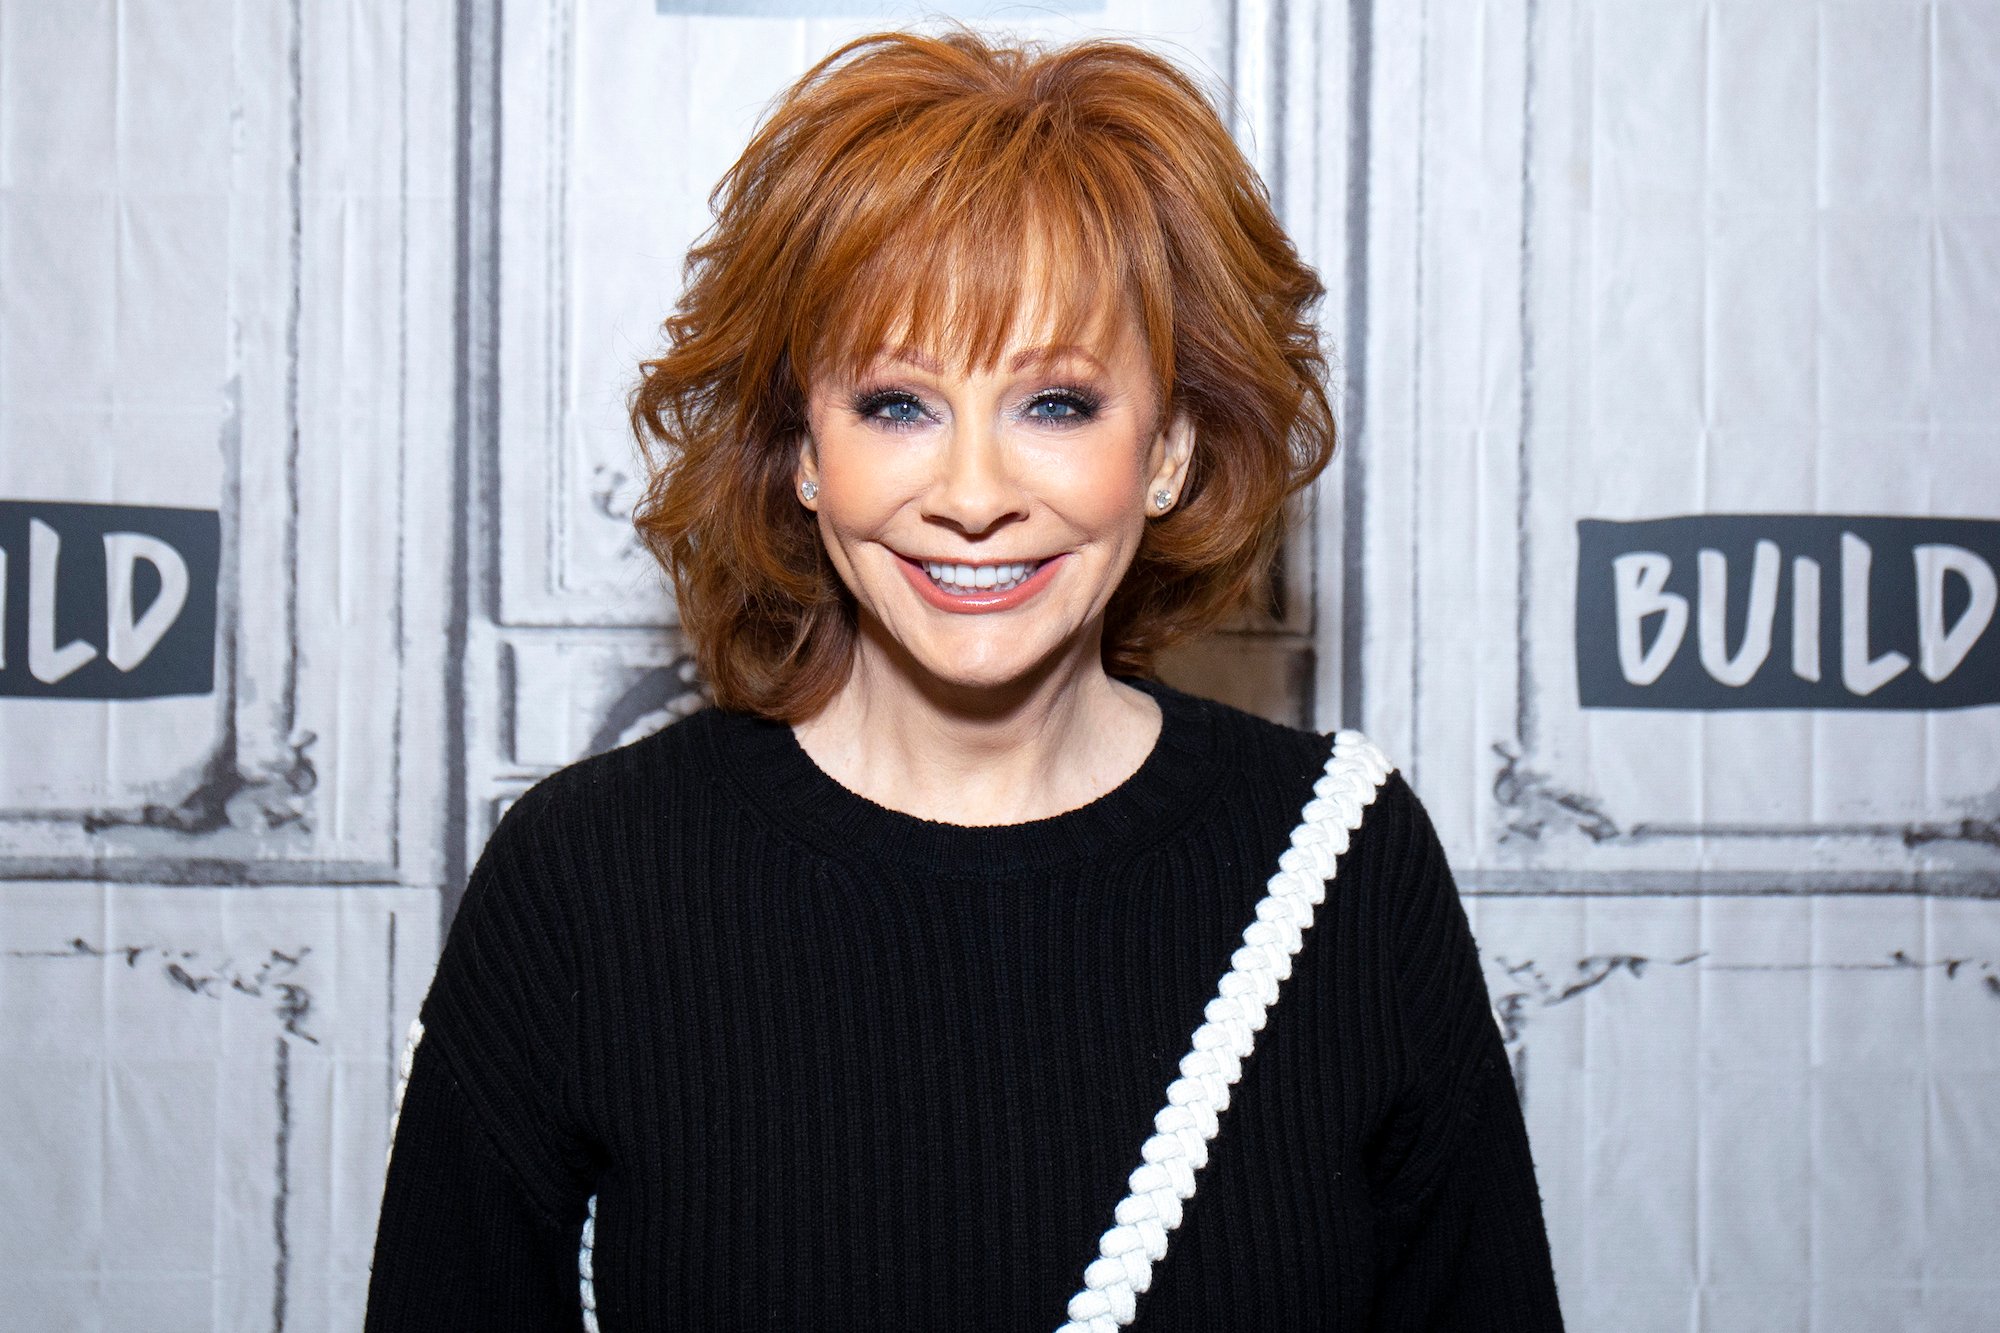 Reba McEntire smiling in front of a white background